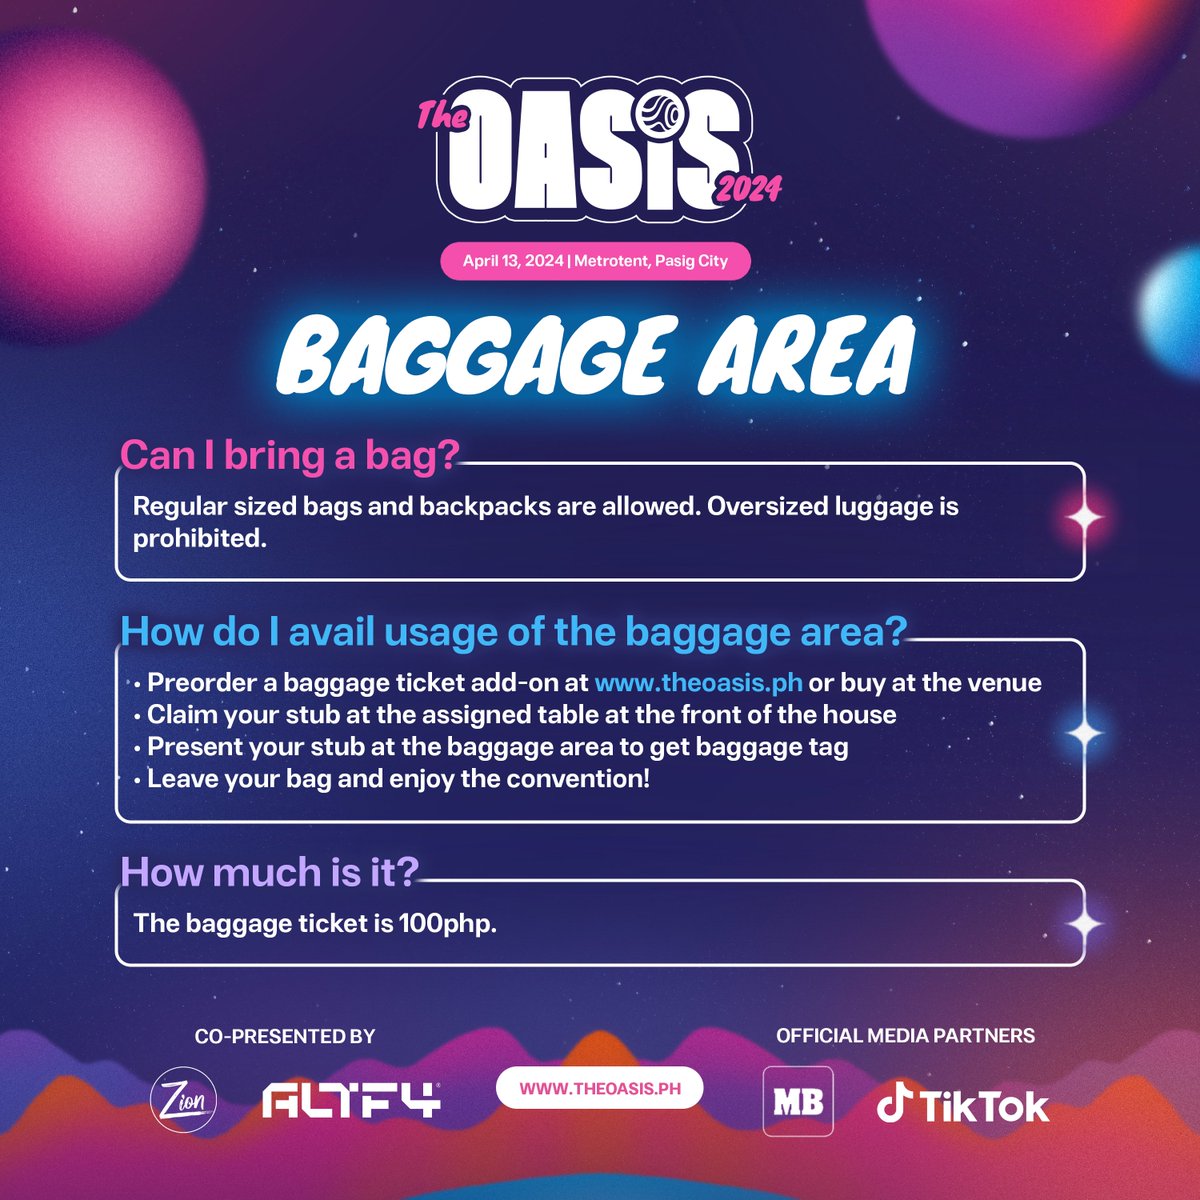 Need a place to store your stuff?

Roam around The OASIS freely without your heavy backpacks. Keep your stuff safe at our BAGGAGE AREA!

Get your baggage tickets here:
theoasis.ph/products/bagga…

#TheOASIS2024 #SinceDayOne